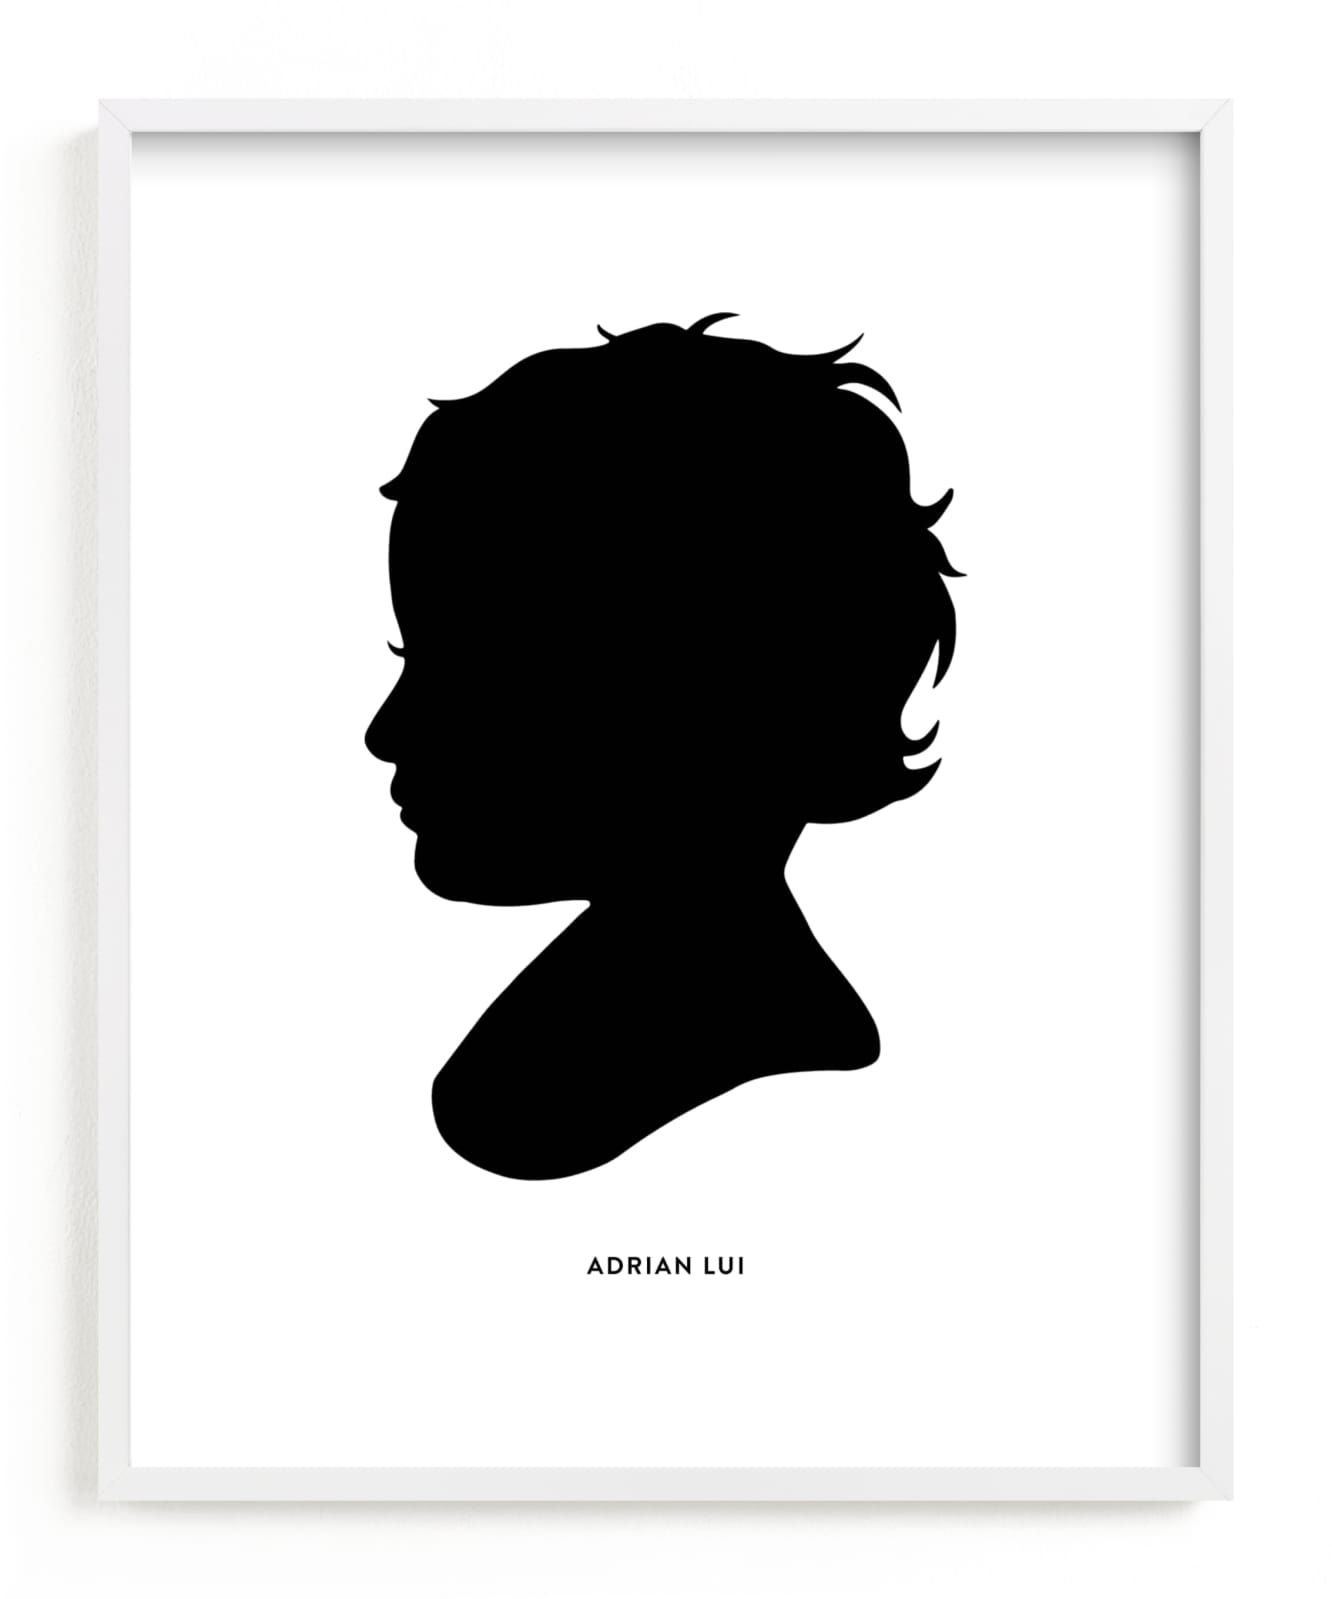 This is a black and white silhouette art by Minted called Custom Silhouette Art.